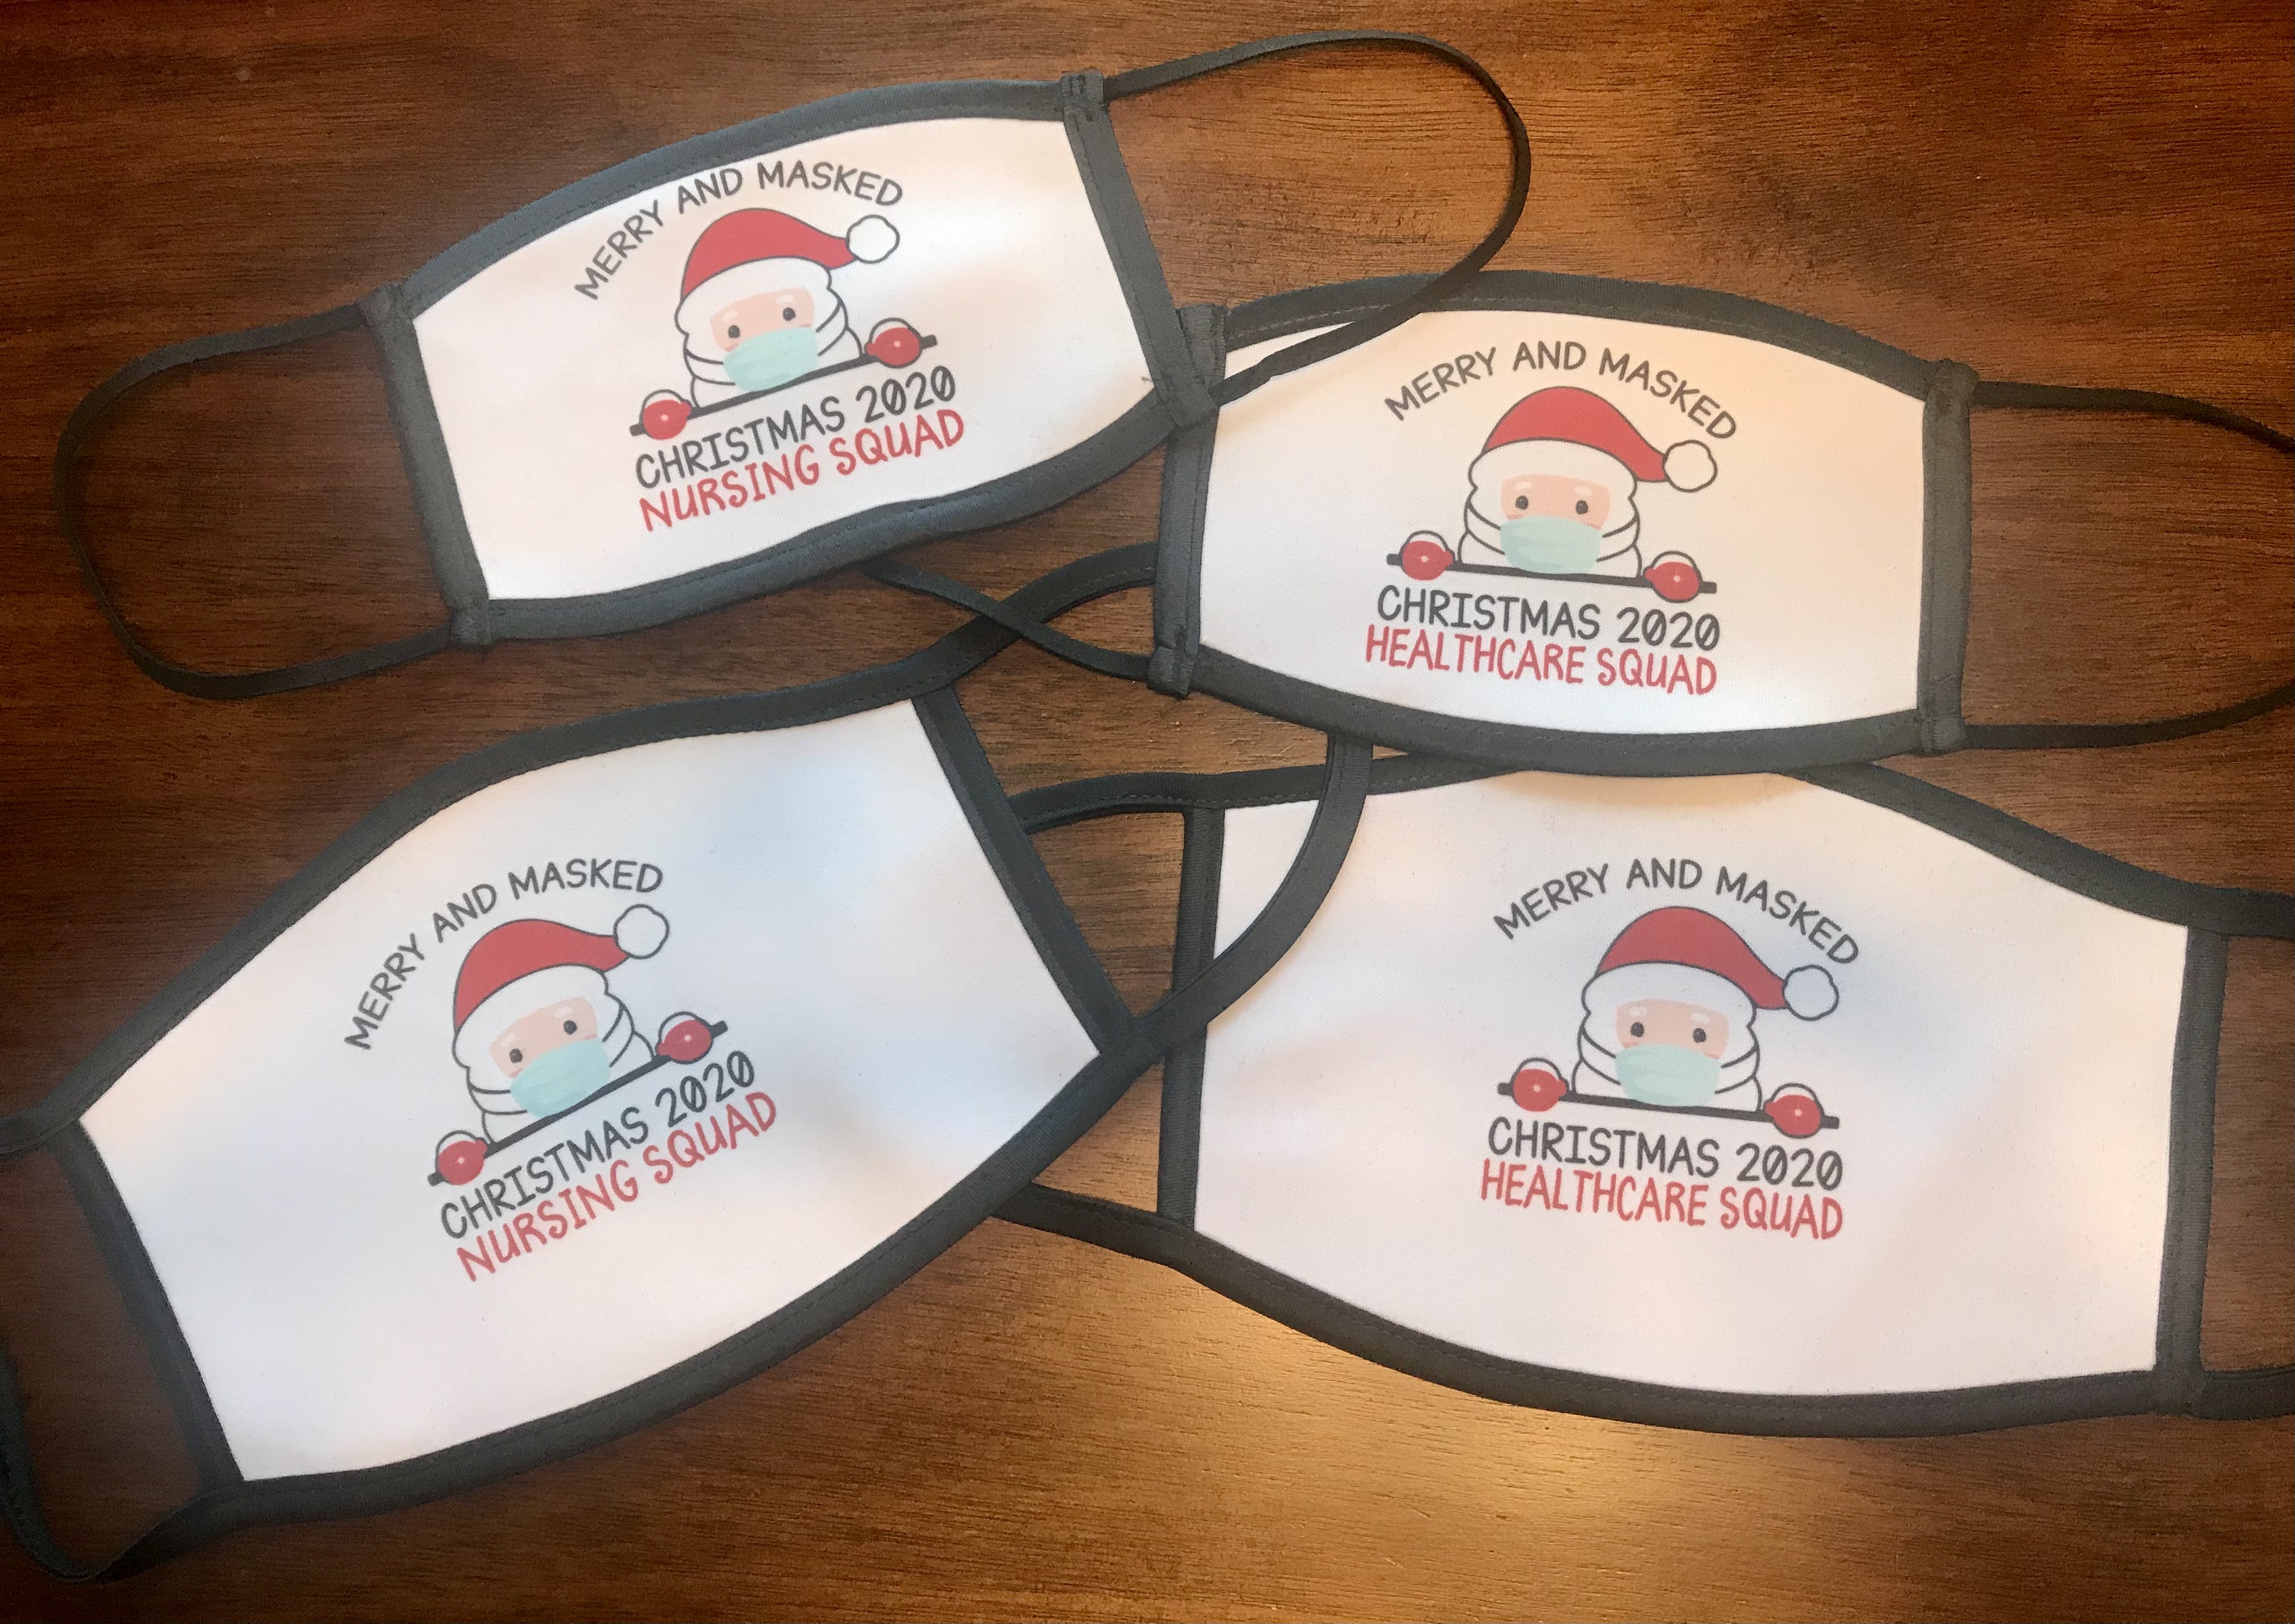 Masks for local healthcare workers for the holidays! Hoping to brighten their days a little!